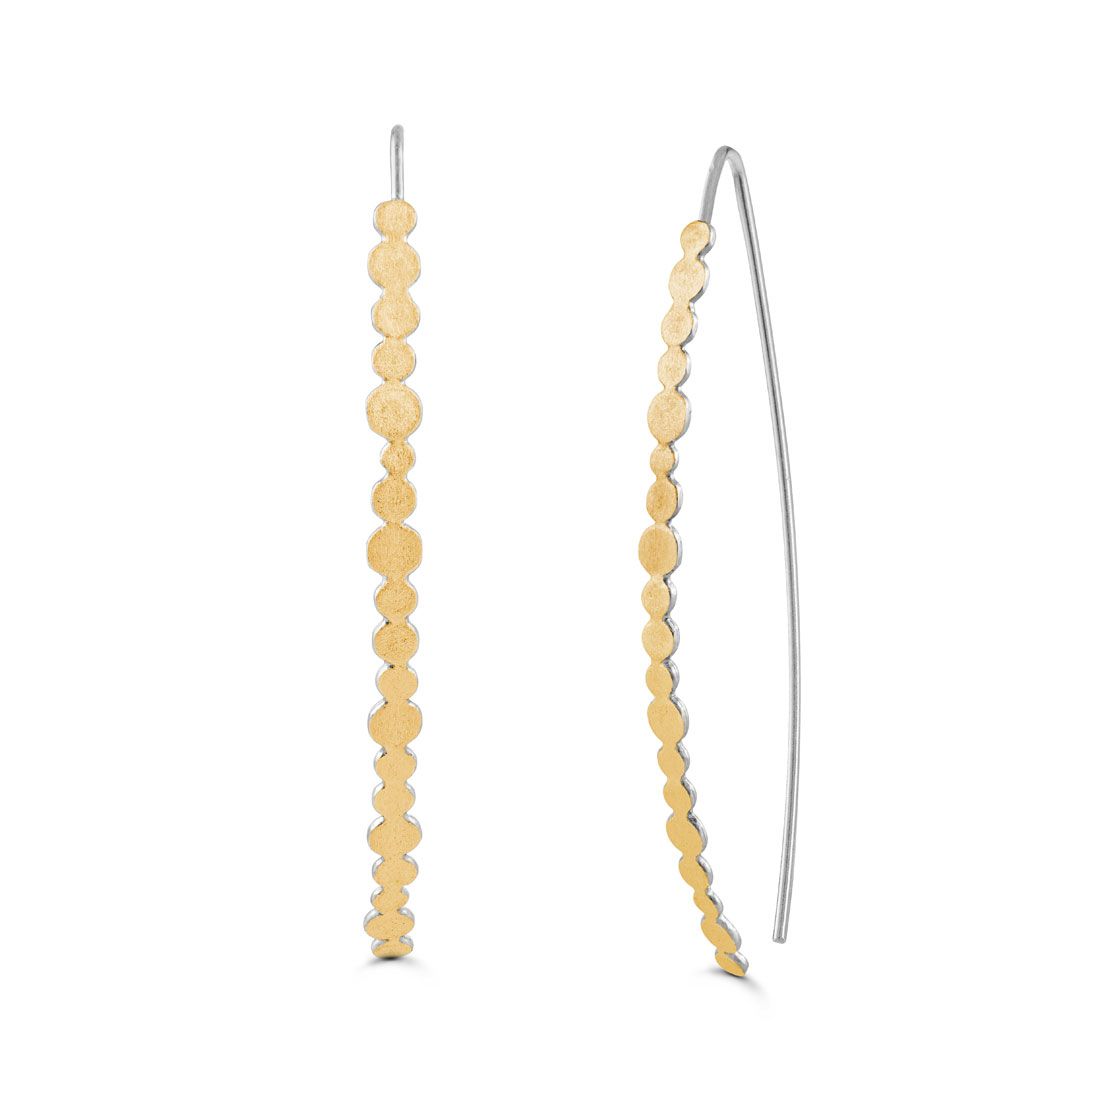 Simple and elegant gold earrings with matte drops.